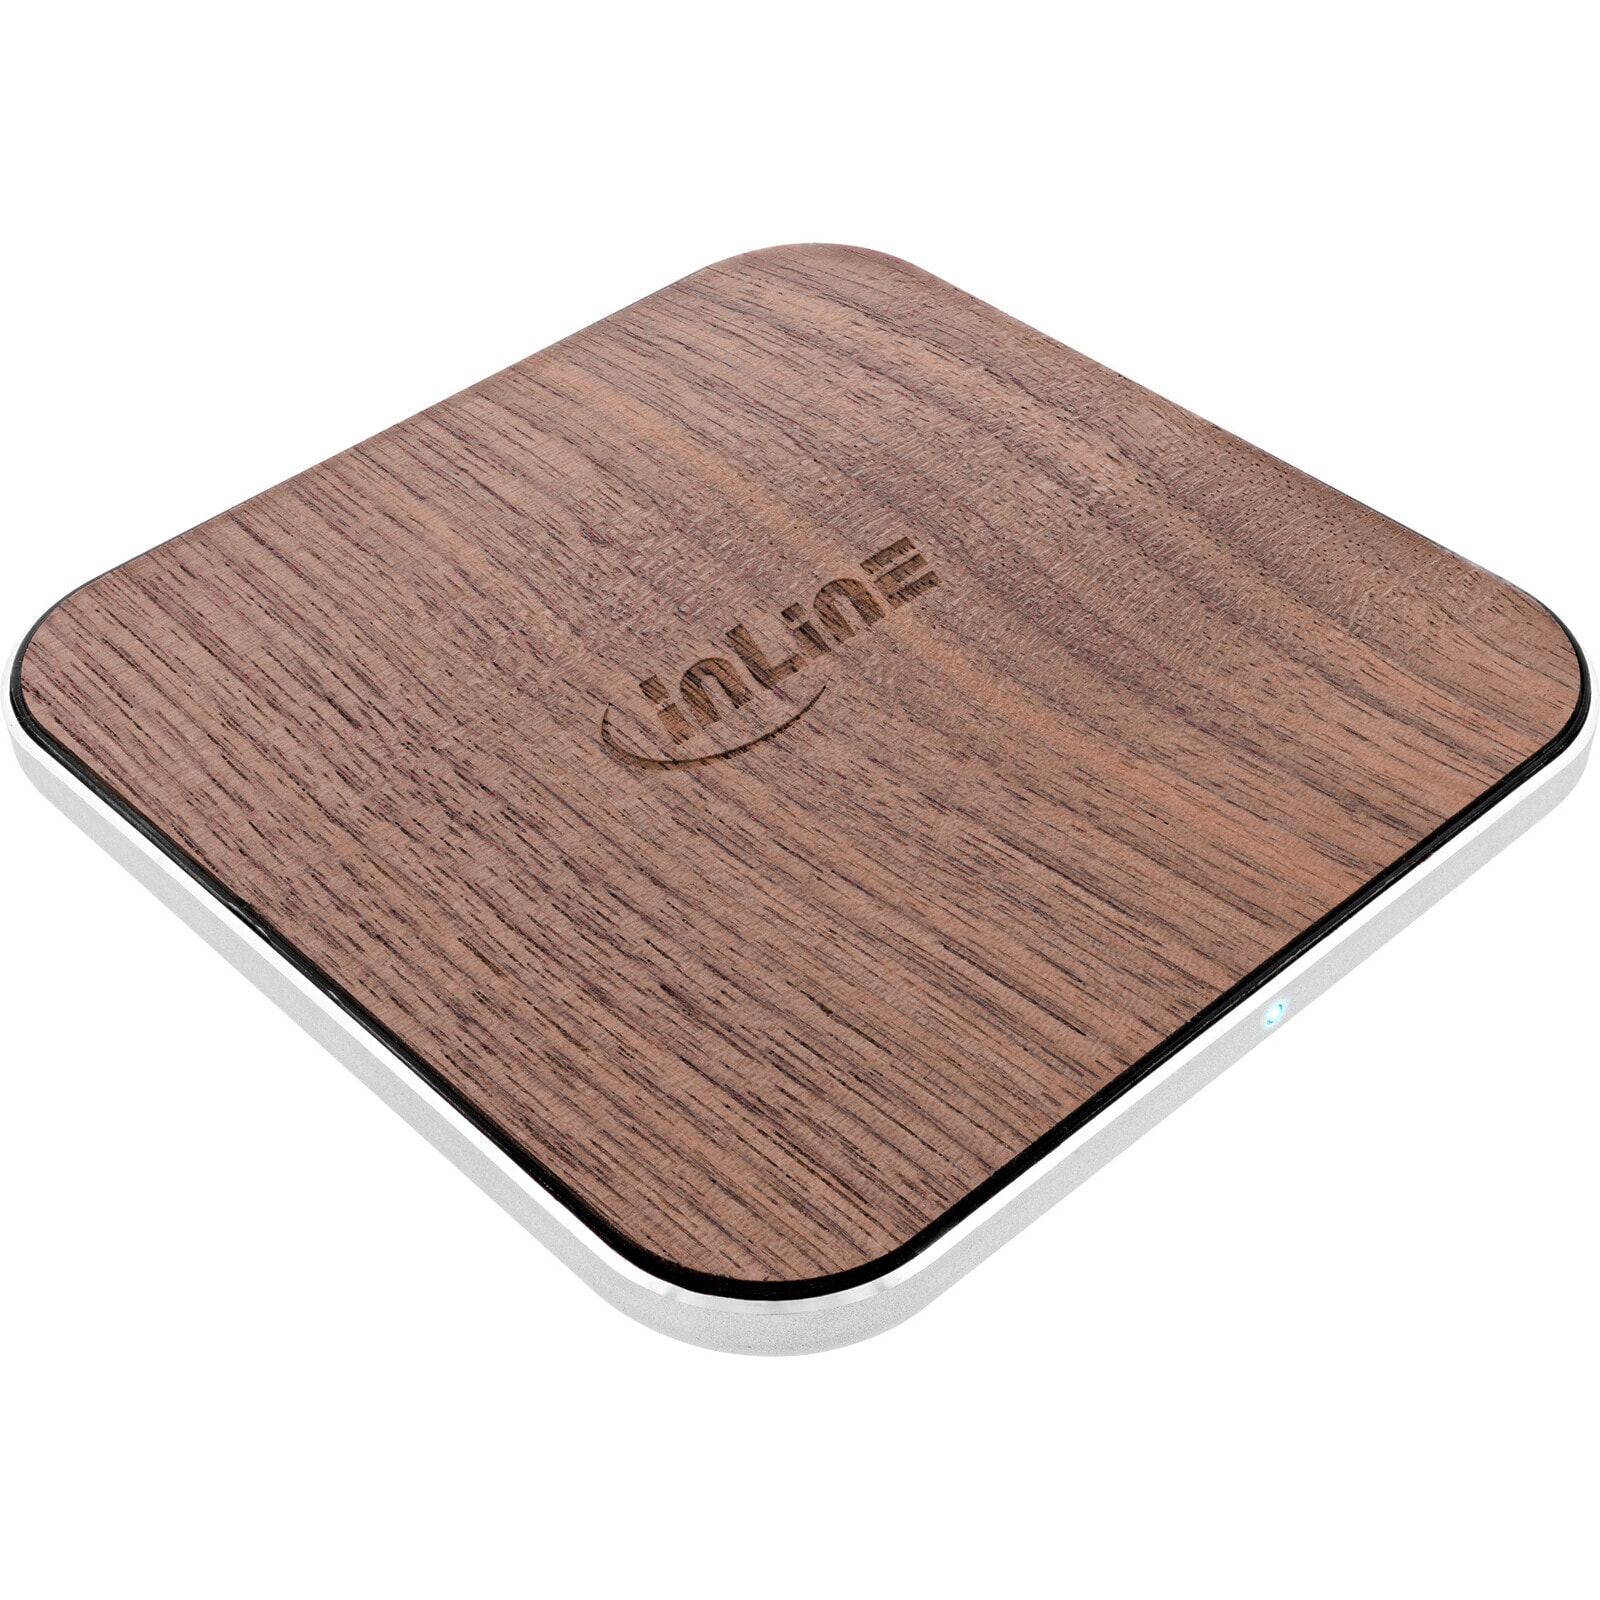 Qi woodcharge - wireless fast charger - 5/7,5/10W/15W - USB-C